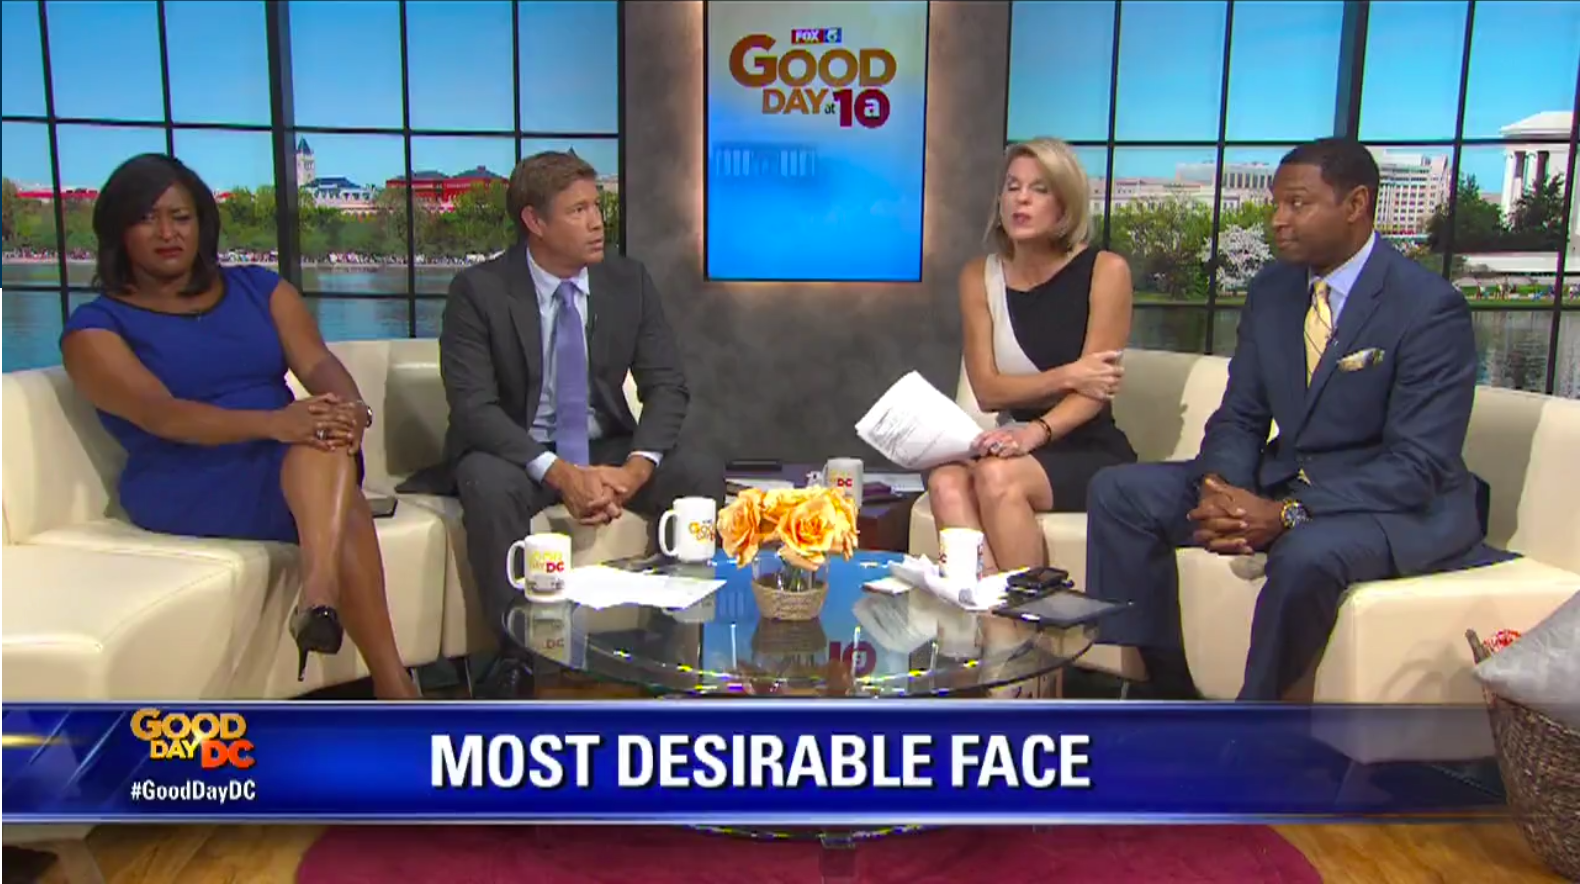 Morning Show Hosts Serve Serious Side-Eye During Segment on Beauty Standards
